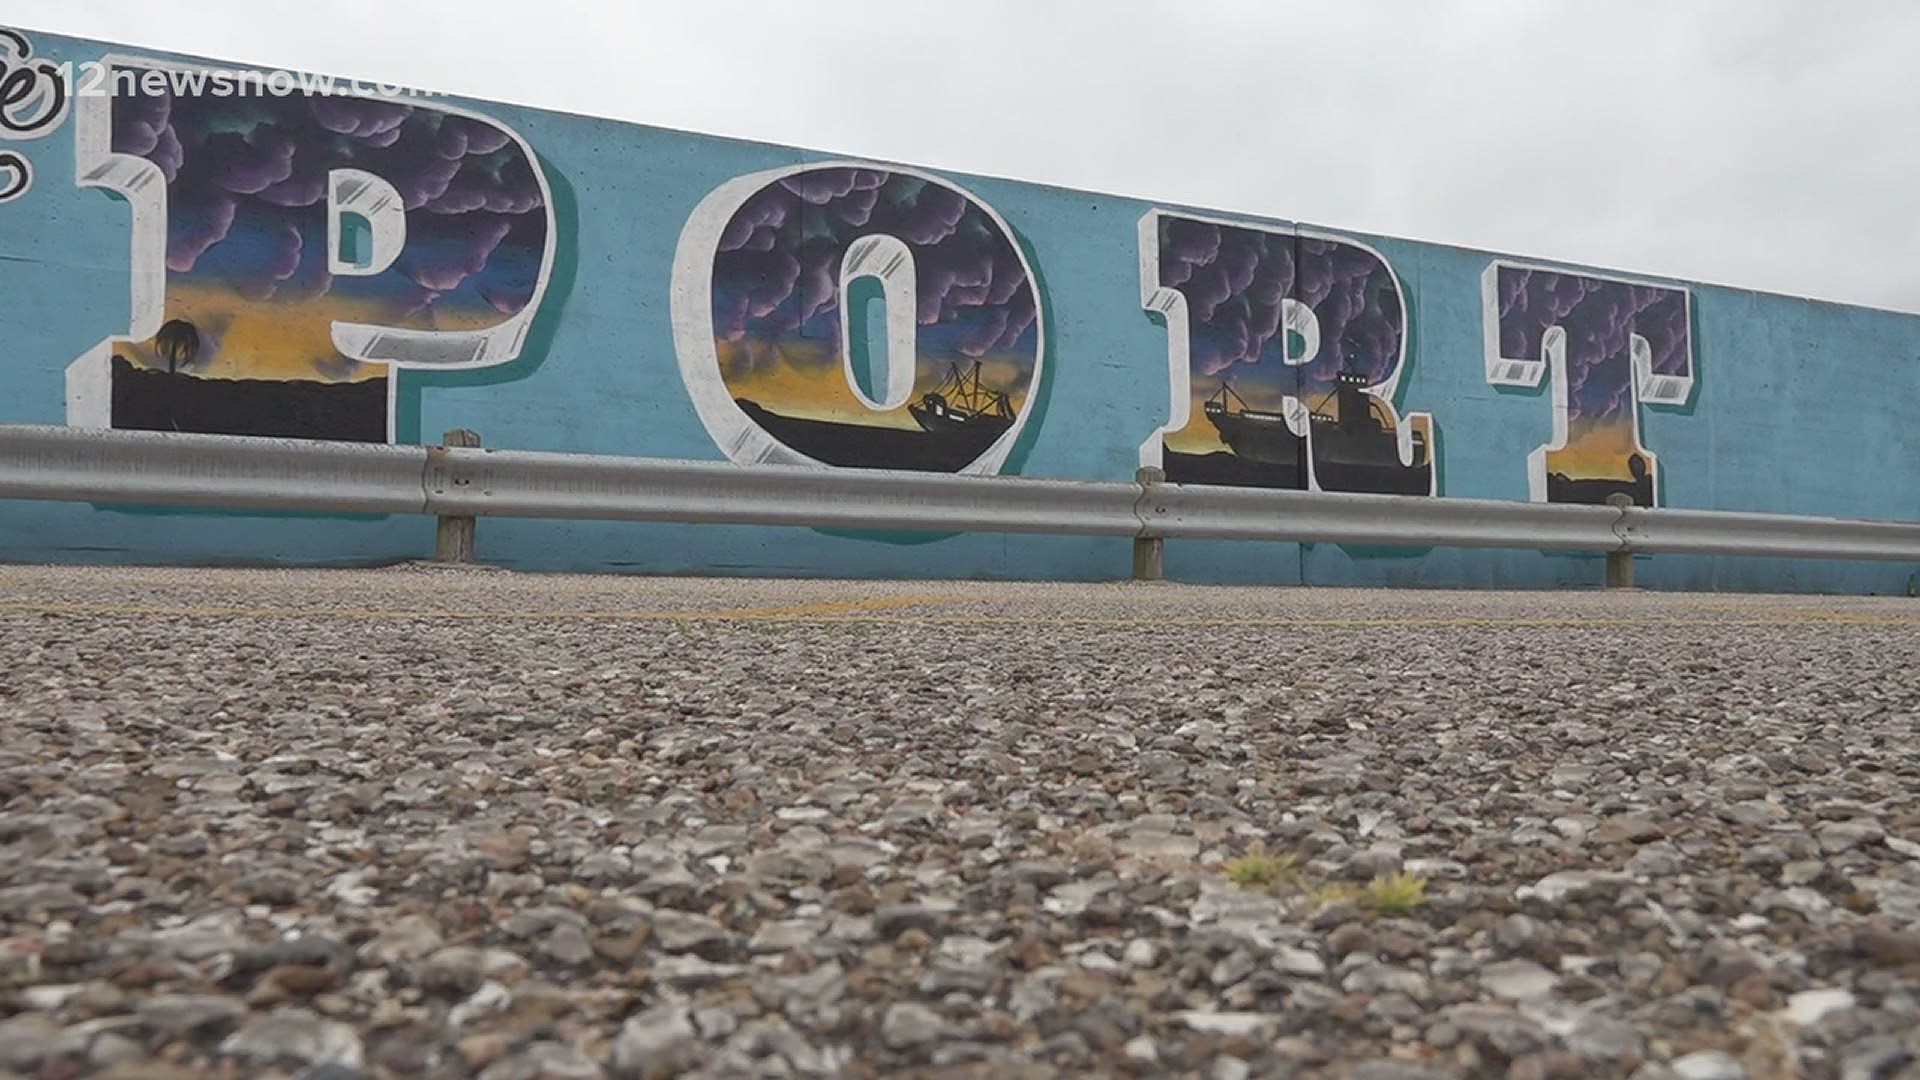 Since it was finished in 2019, the mural has been a constant target for vandals.